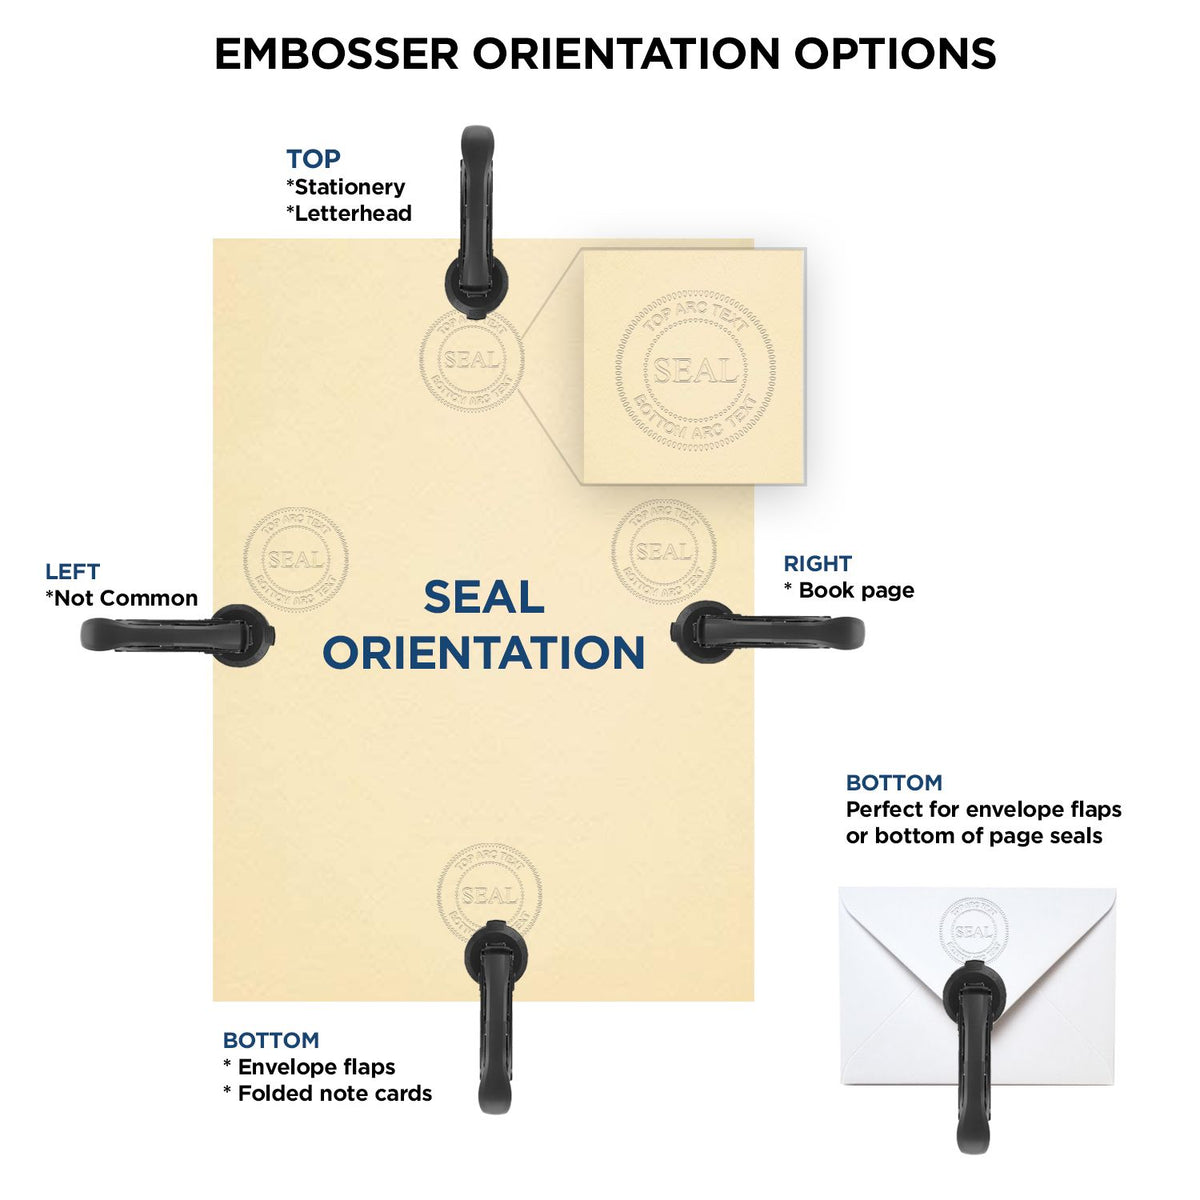 An infographic for the State of Florida Extended Long Reach Engineer Seal showing embosser orientation, this is showing examples of a top, bottom, right and left insert.